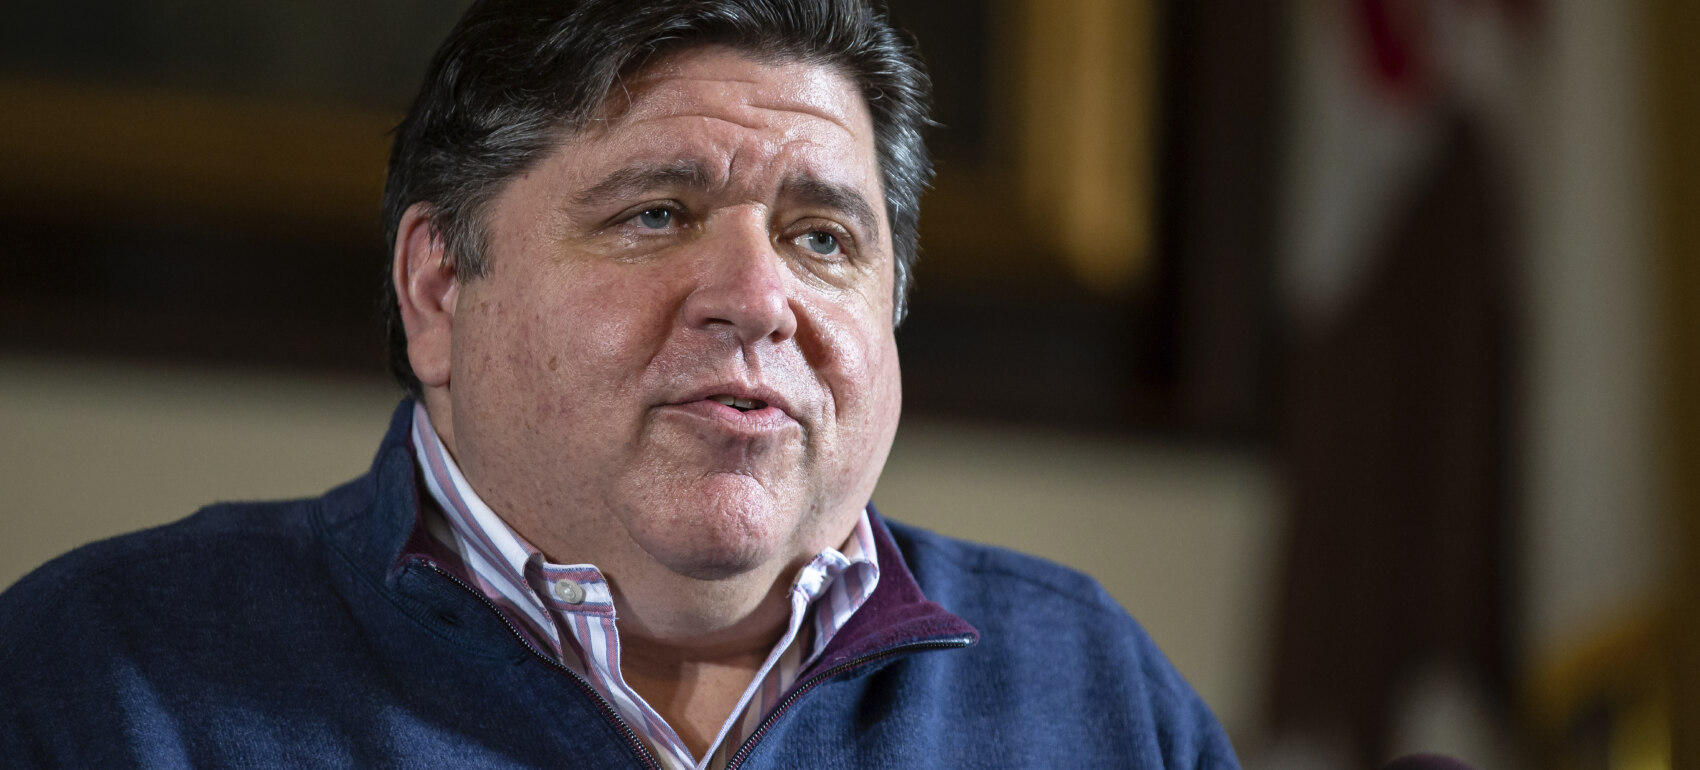 fact-check-pritzker-claims-balanced-budgets-state-reports-show-he-s-wrong